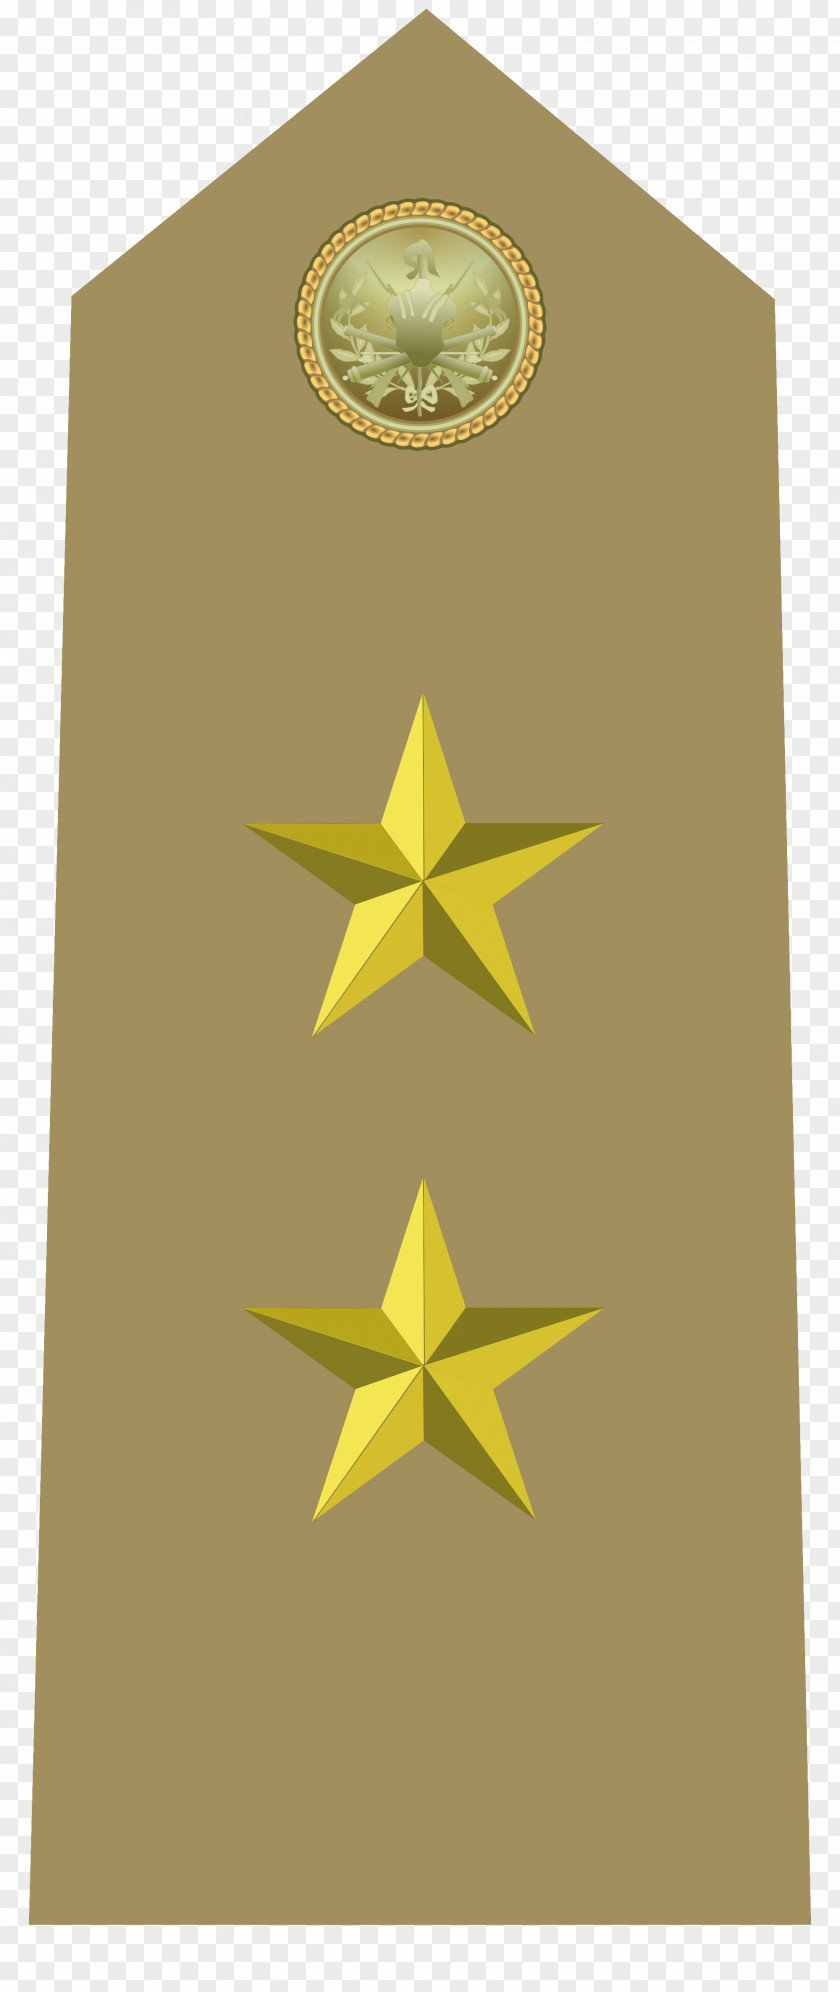 Army Staff Captain Colonel Military Rank Italian PNG